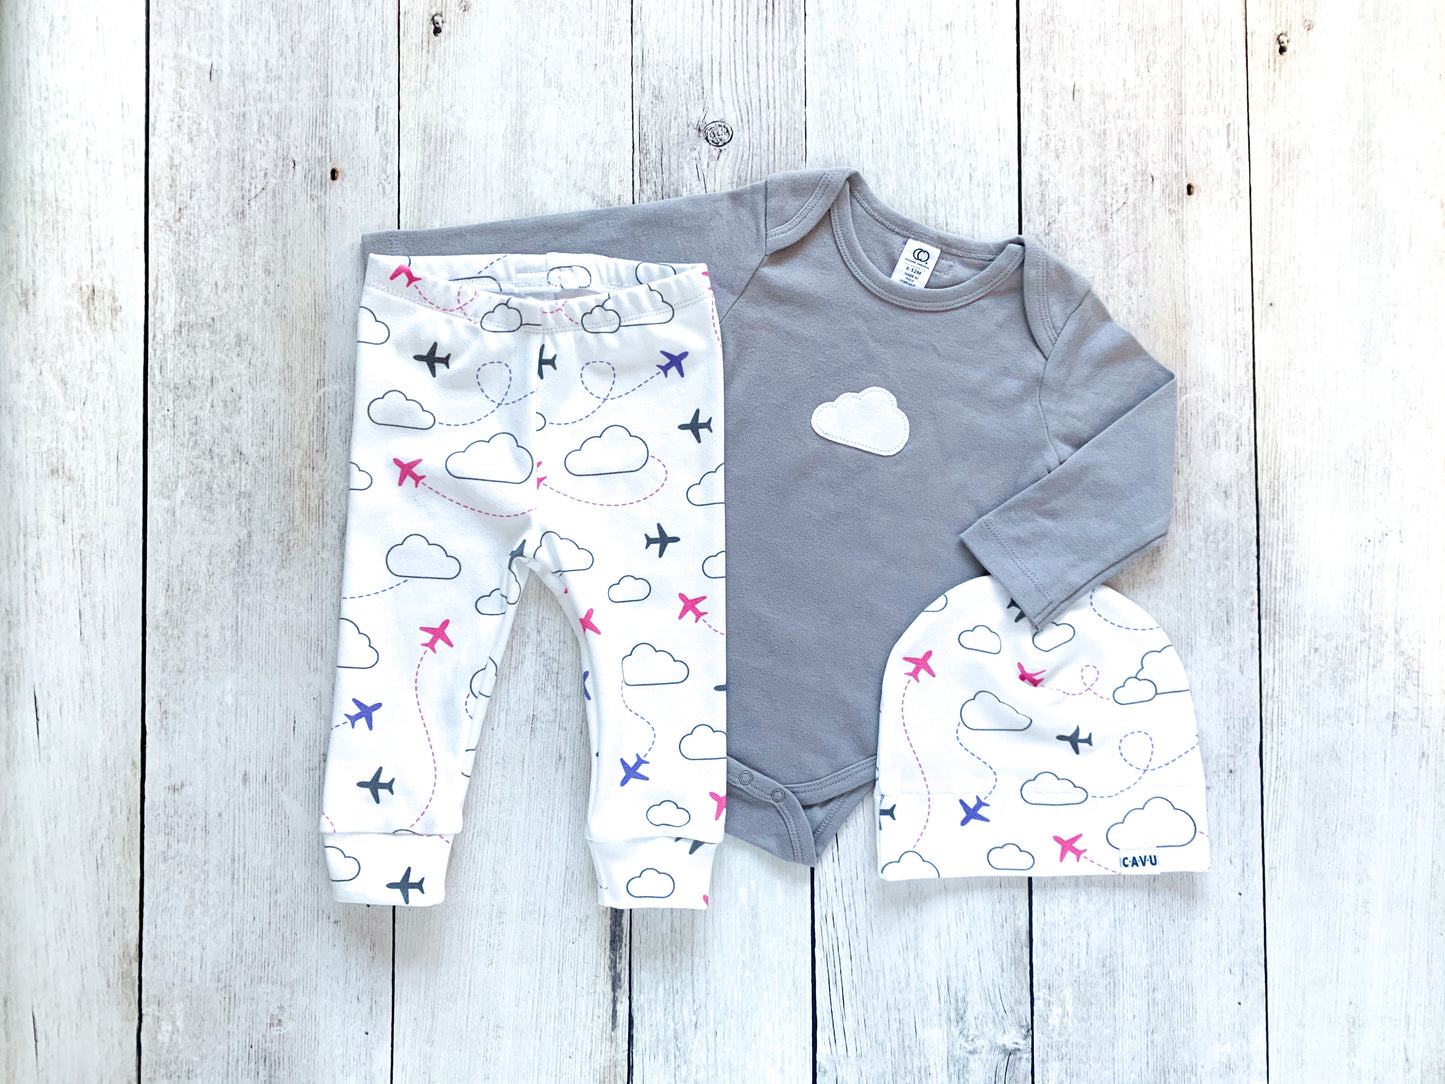 Jets in Clouds Organic Baby Leggings - Purple / Pink / Charcoal Gray / White